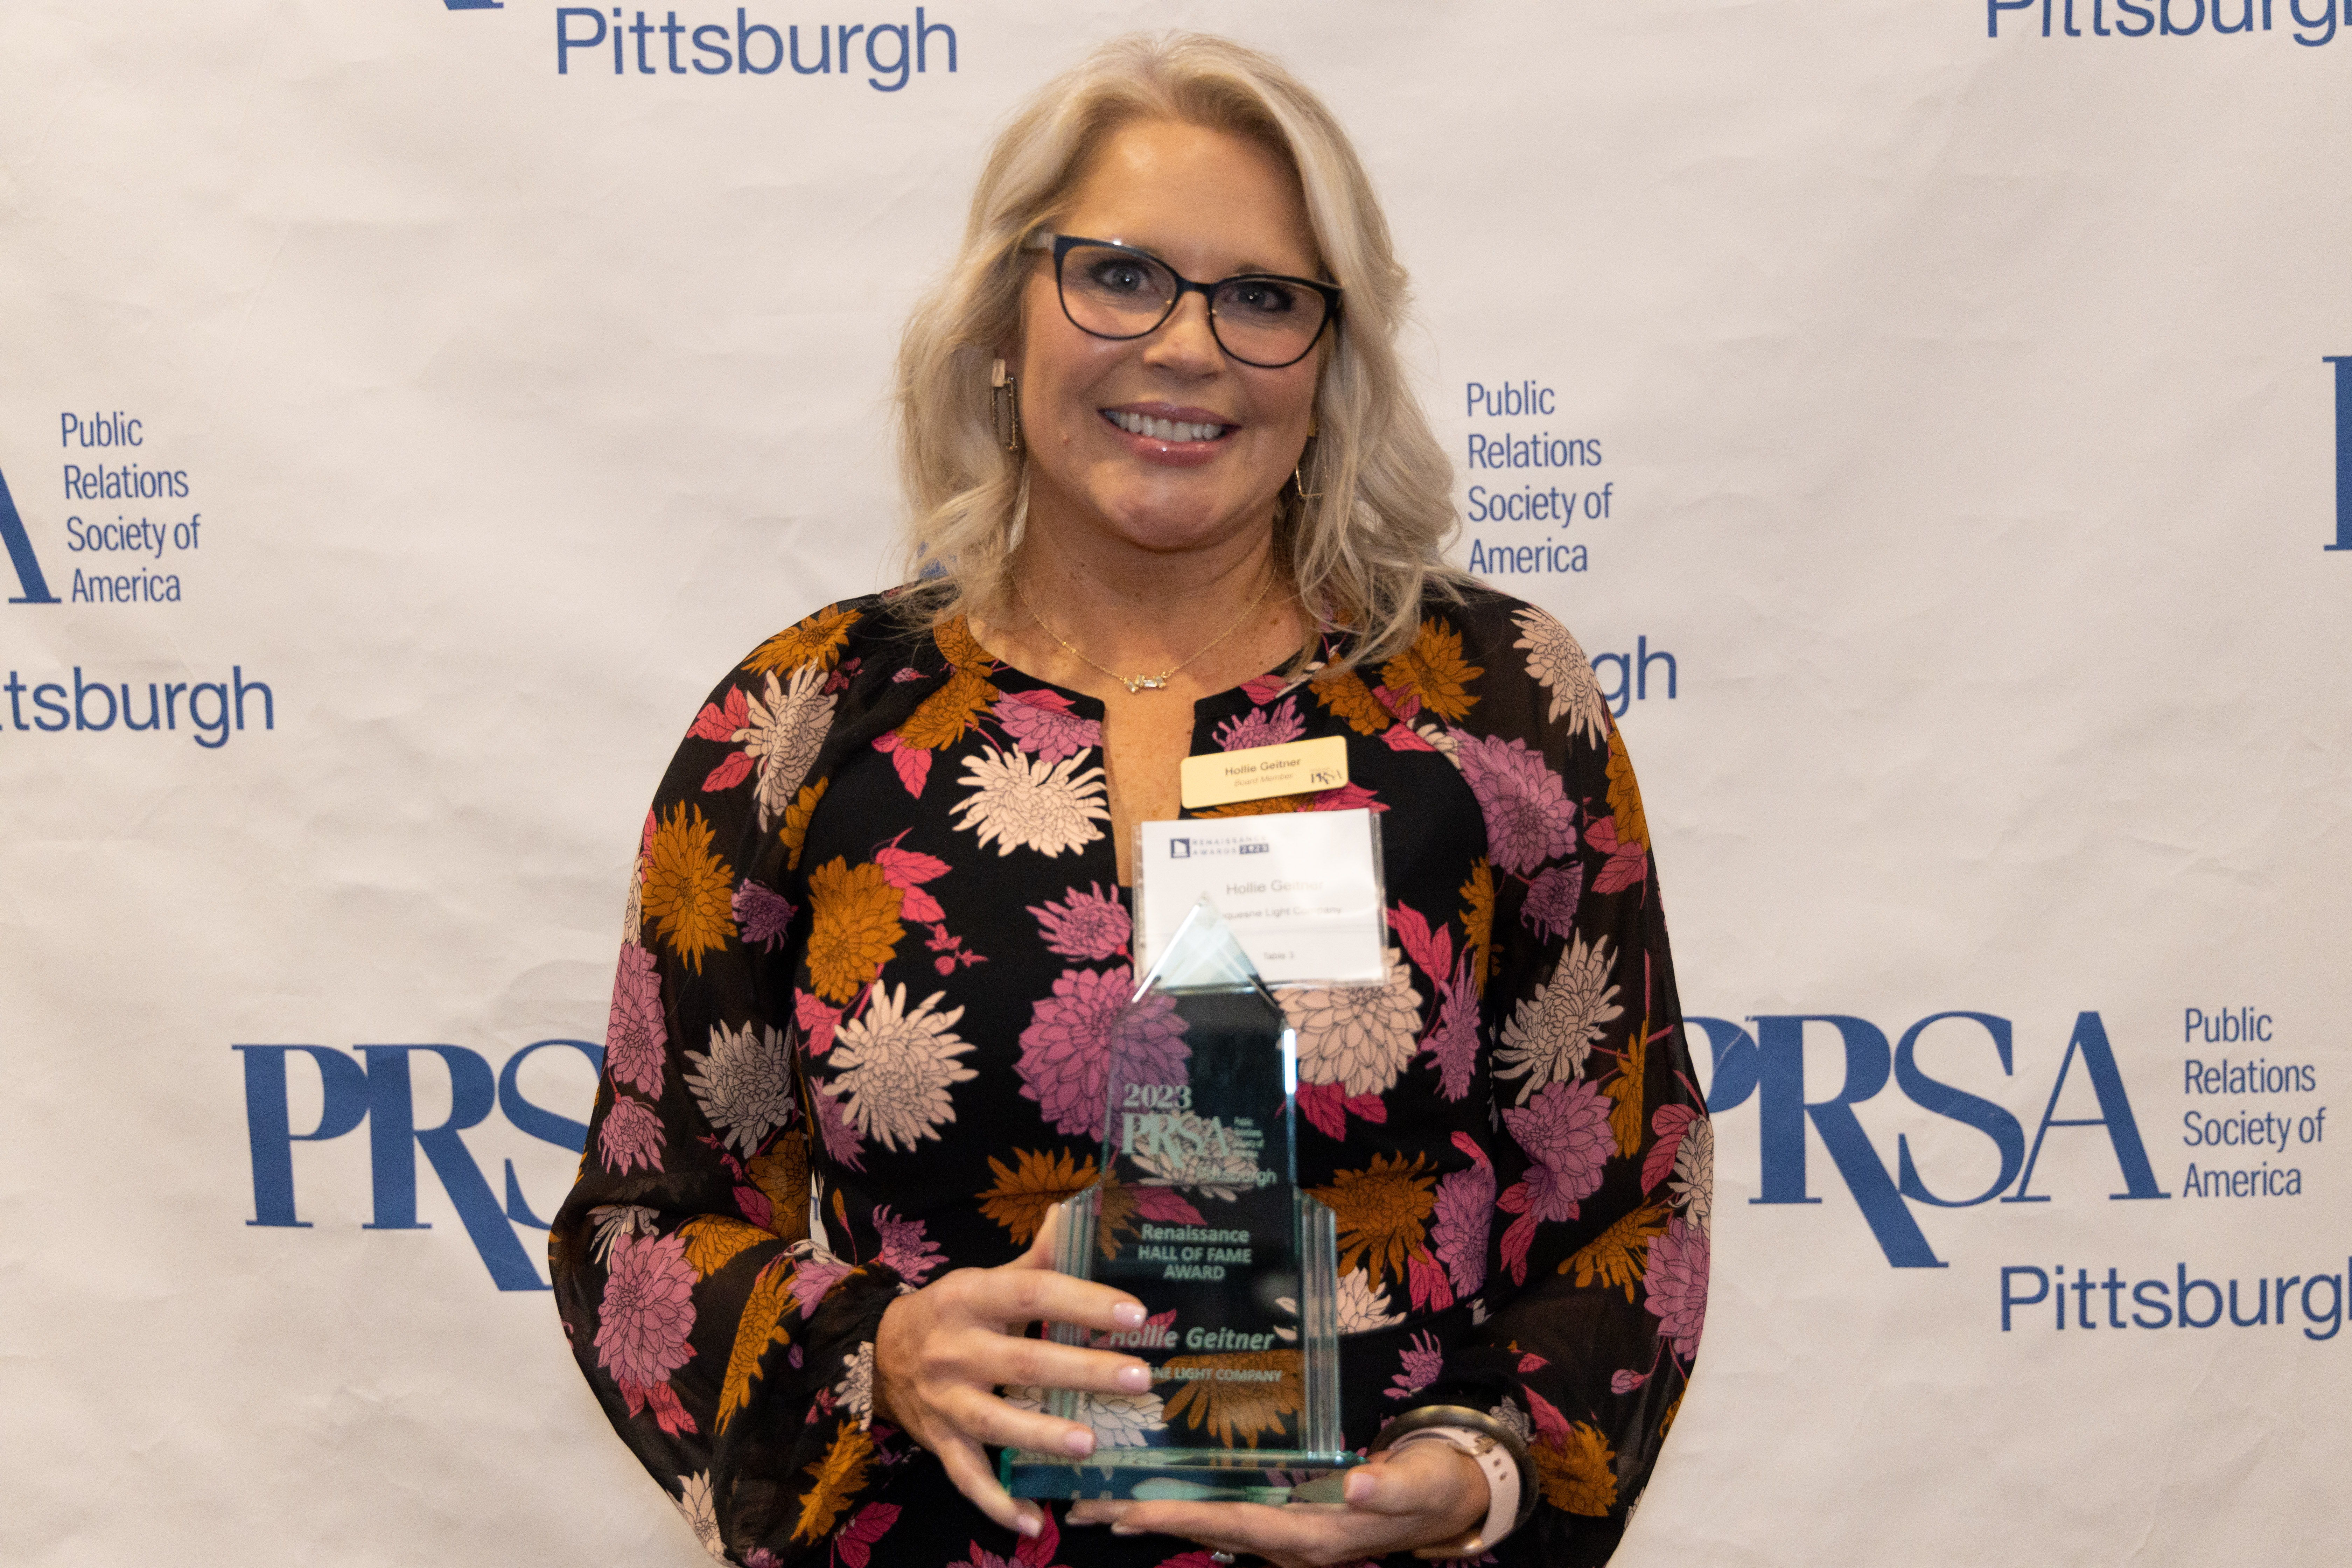 Hollie Geitner, DLC's director of communications and brand, was recognized with the Renaissance Hall of Fame award at PRSA Pittsburgh's 2023 Renaissance Award ceremony held at the Carnegie Science Center on Jan. 26. ​